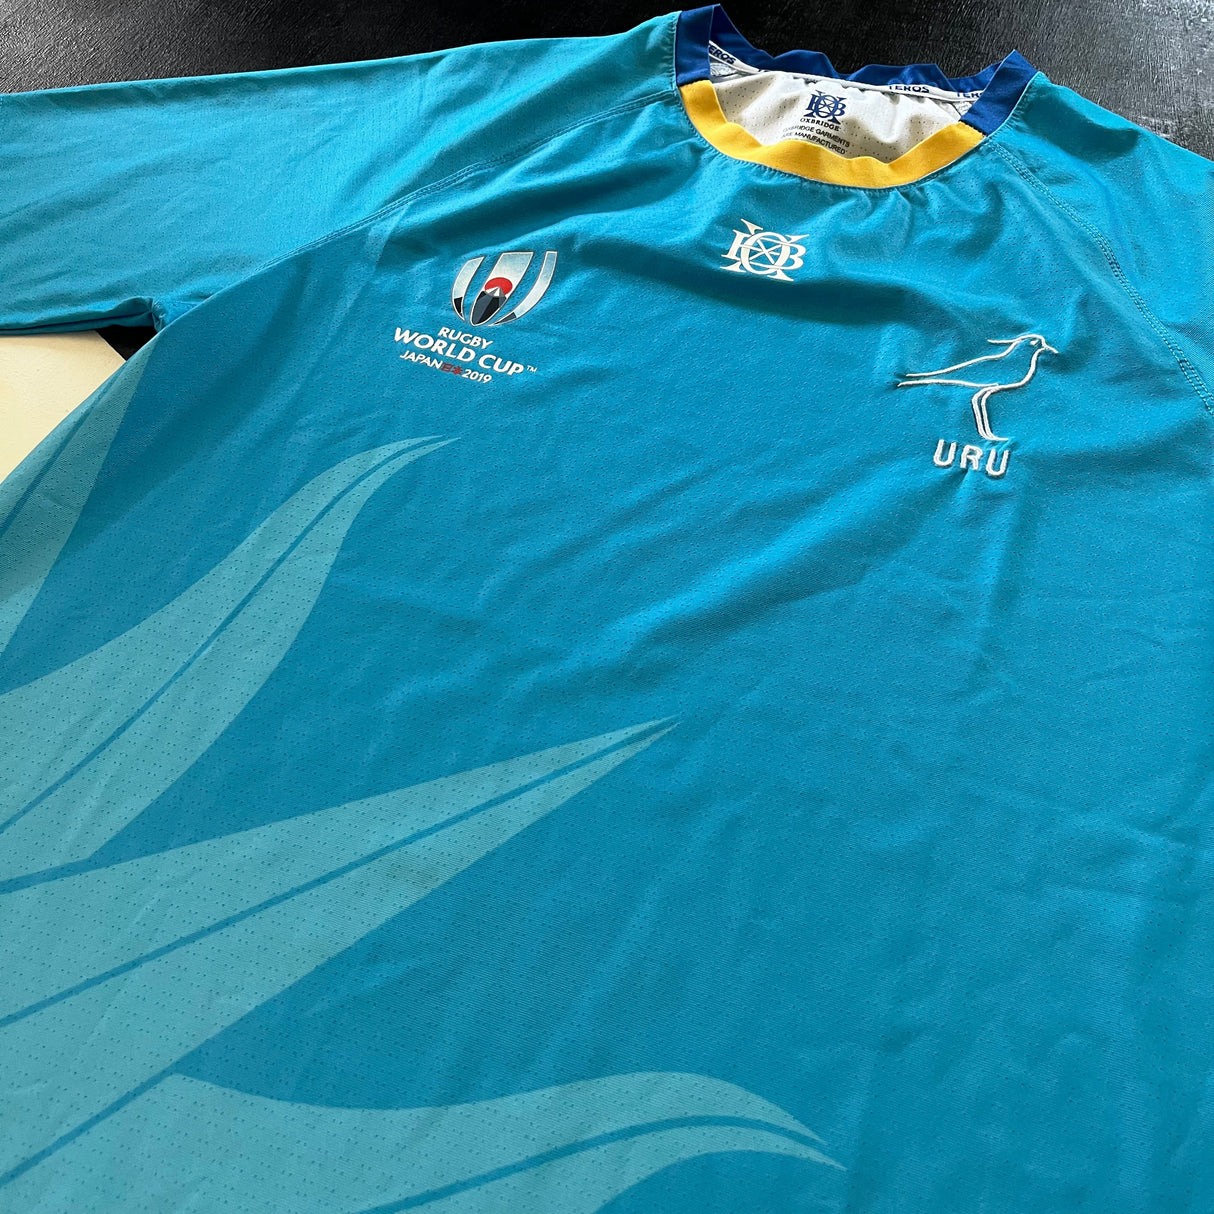 Uruguay National Rugby Team Jersey 2019 Rugby World Cup Medium Underdog Rugby - The Tier 2 Rugby Shop 